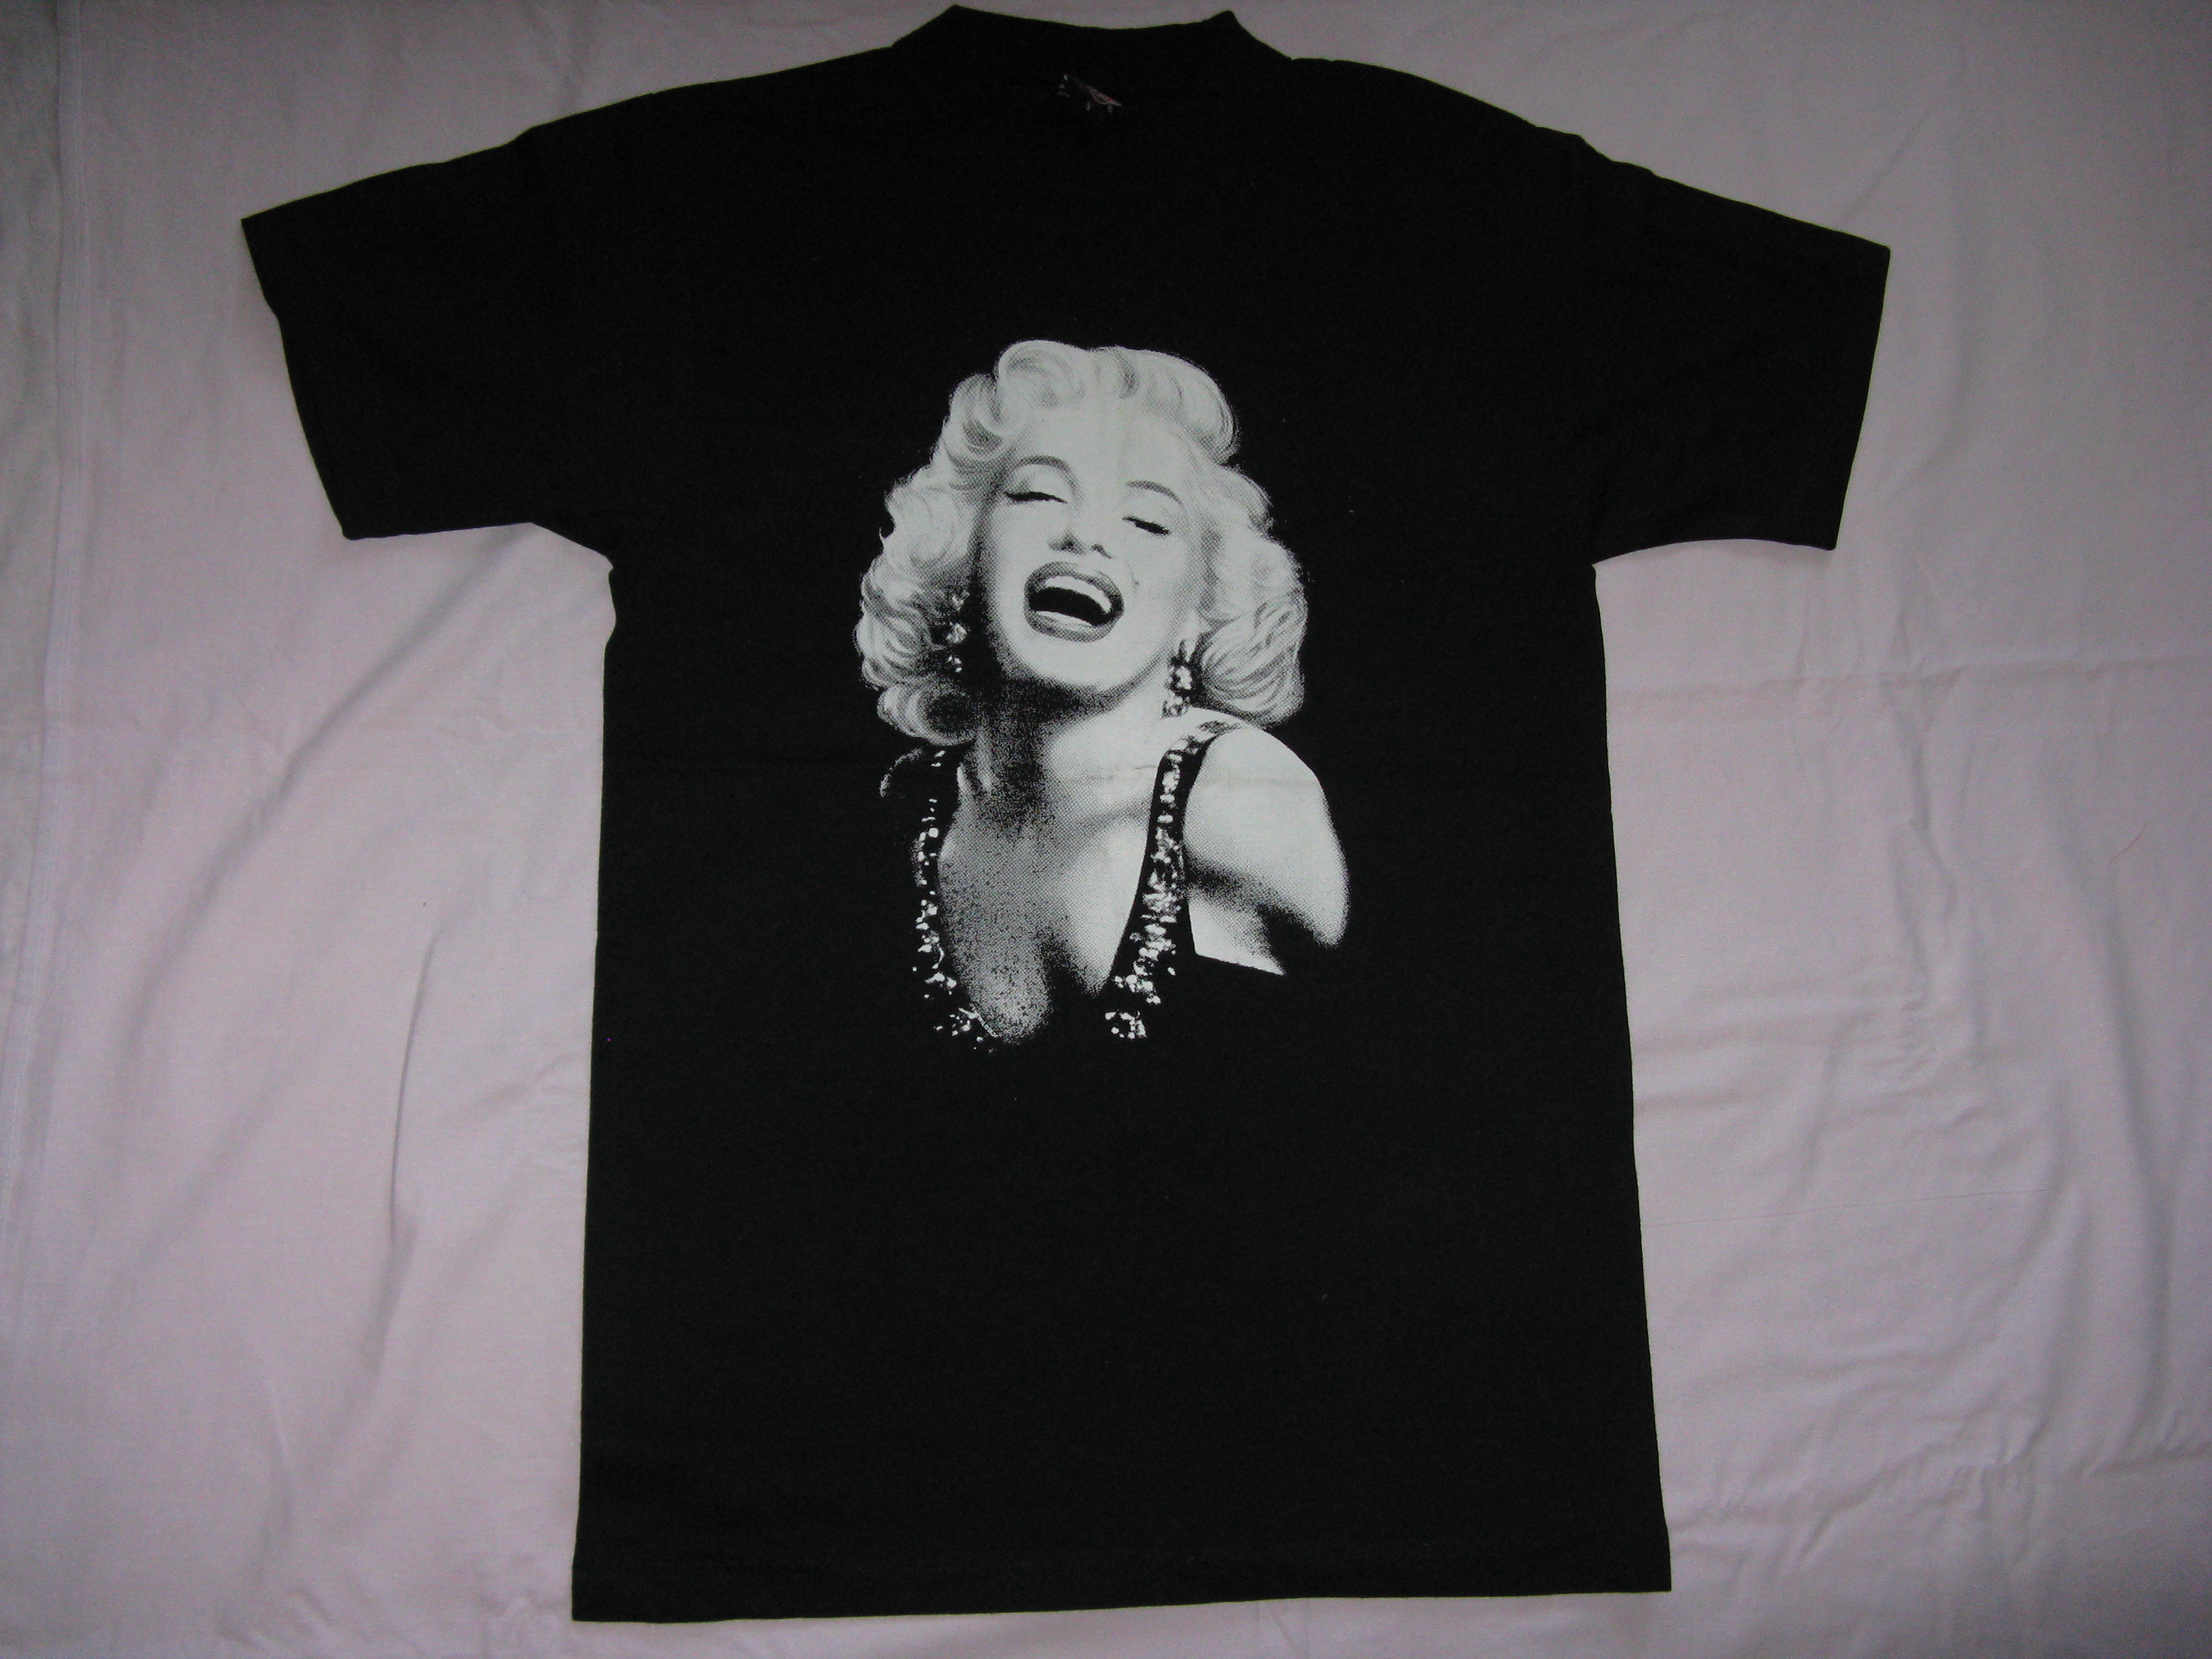 T-SHT NICE MARILYN MONROE-  UNFORGETTABLE GIFT- AMERICAN T-SHIRT PRINTED(CAT SLEEPING NEAR HAT) AMERICAN MOTIVE-TOP QUALITY-LOWEST PRICE GAURANTEE-DO NOT MISS THIS CHANCE-FREE HOME(POST OFFICE) DELIVERY-ART NO. 1208162113-REA 50